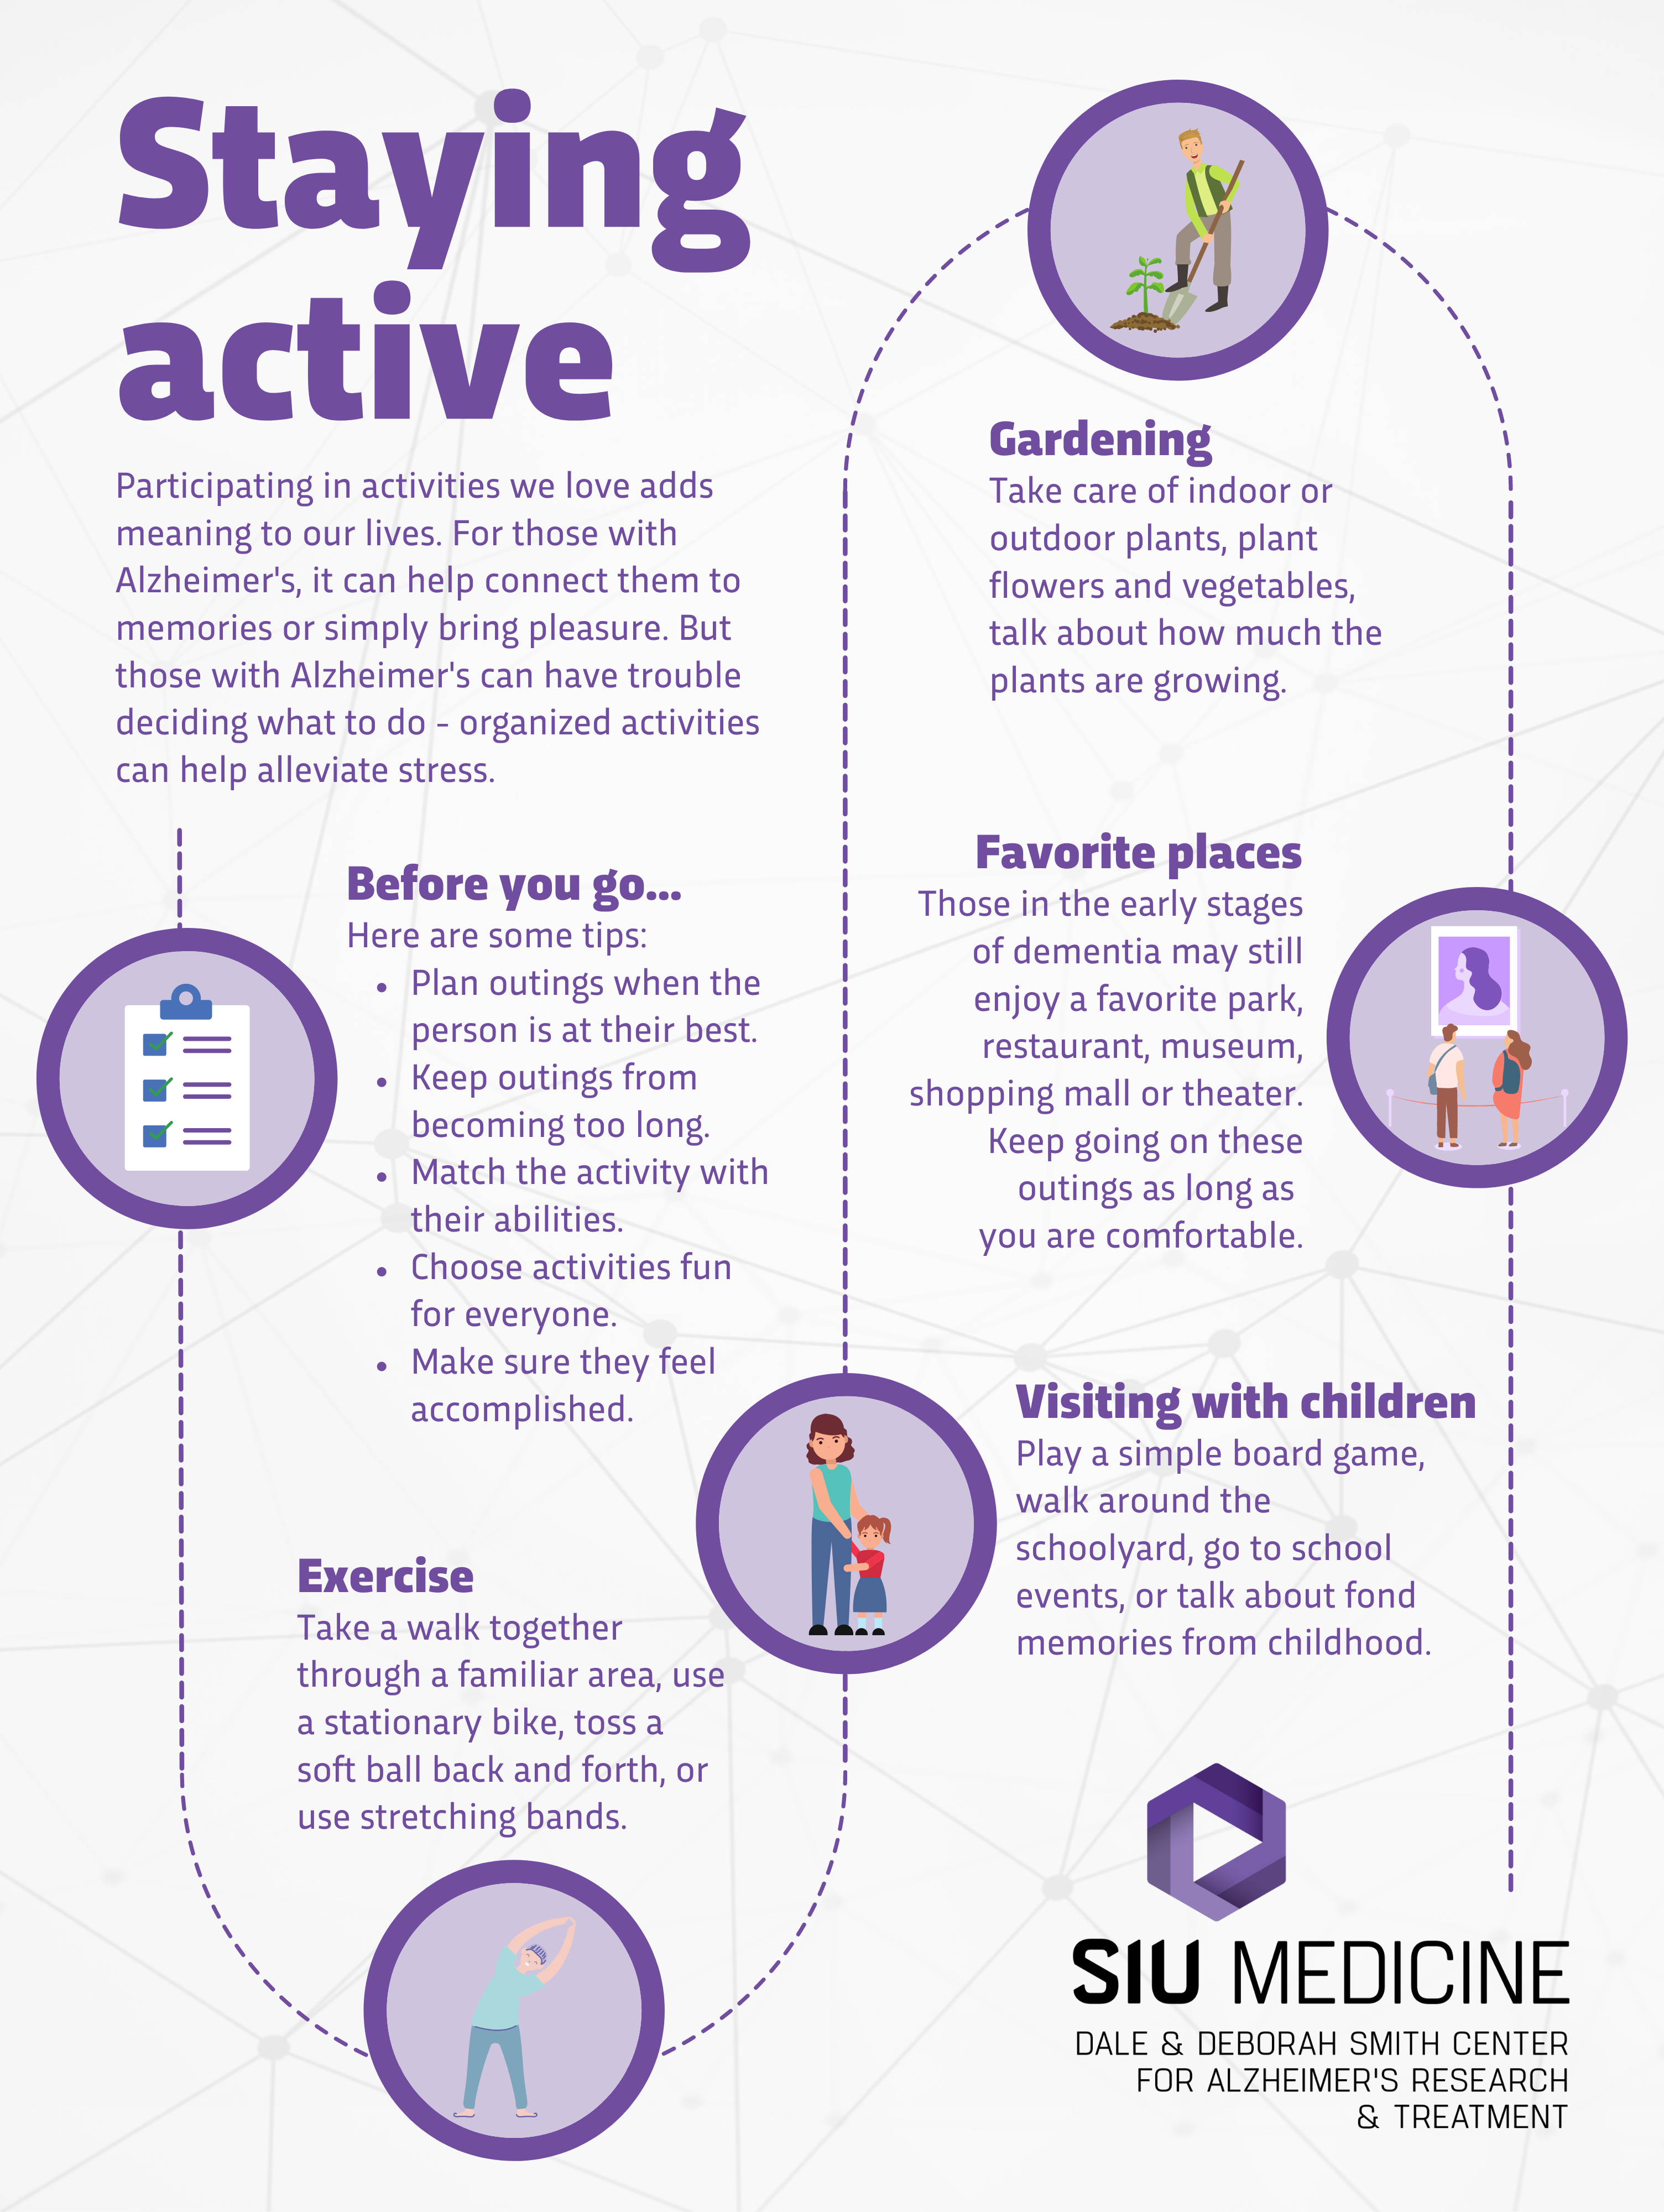 Staying active with dementia